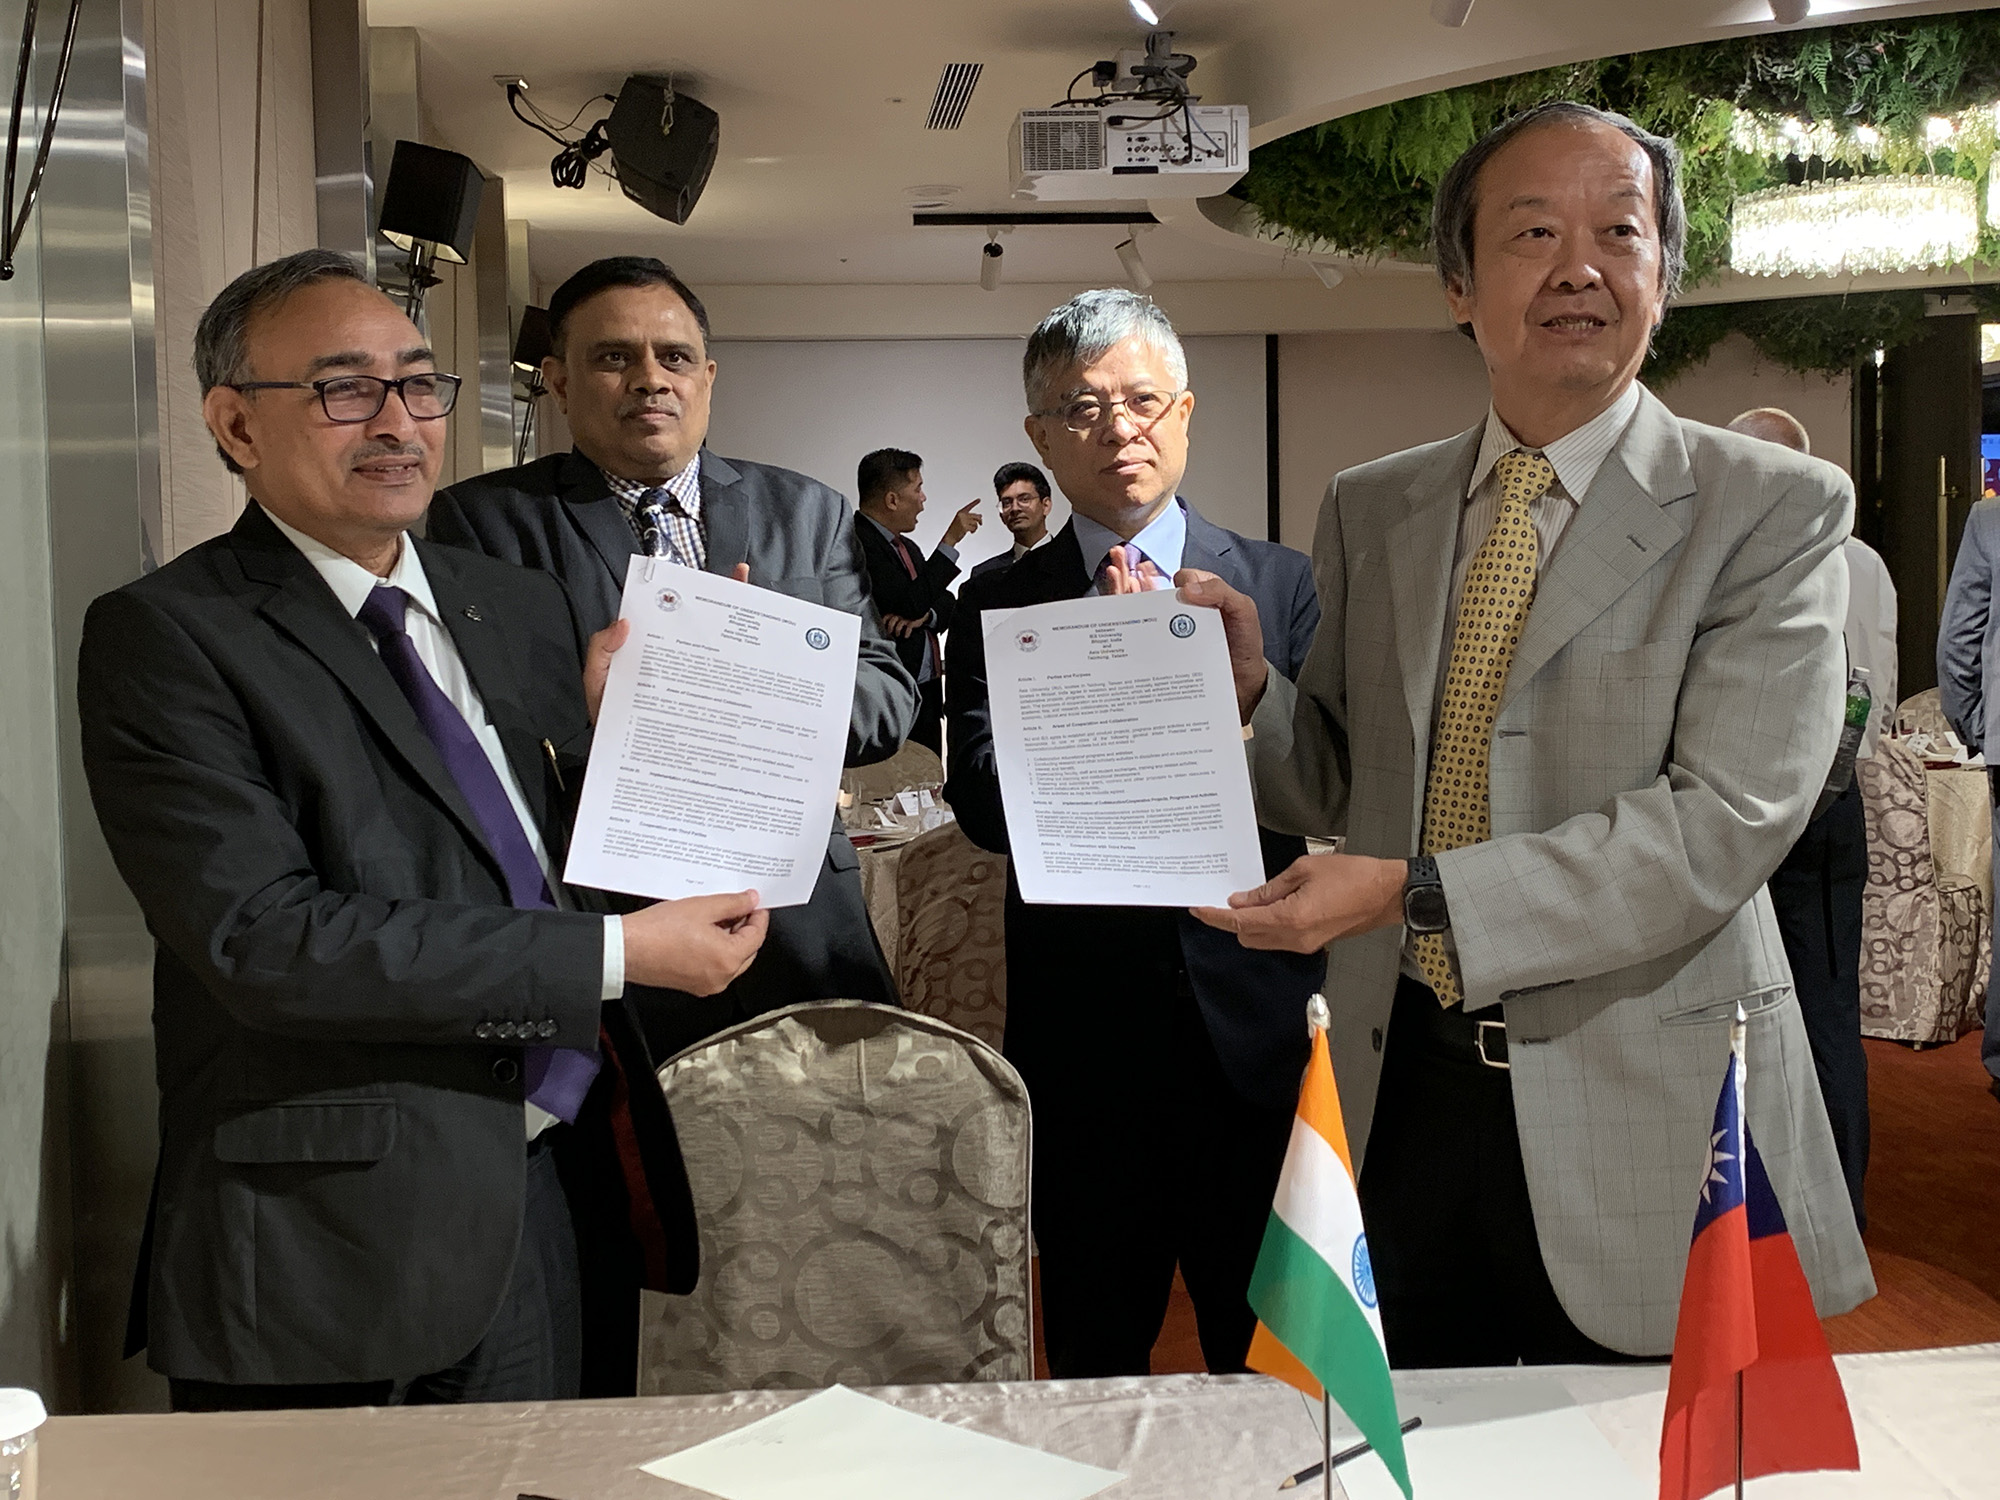 President of IES University, Bhopal, India (left), Er. B.S. Yadav, signs the MOU with the Vice President of Asia University and Dean of the College of Information and Electrical Engineering, Shian-Shyong Tseng (front right). The signing is witnessed by Deputy of the Ministry of Education, Mon-Chi Lio (back right) and Professor Tarak of the All India Council for Technical Education (back left)